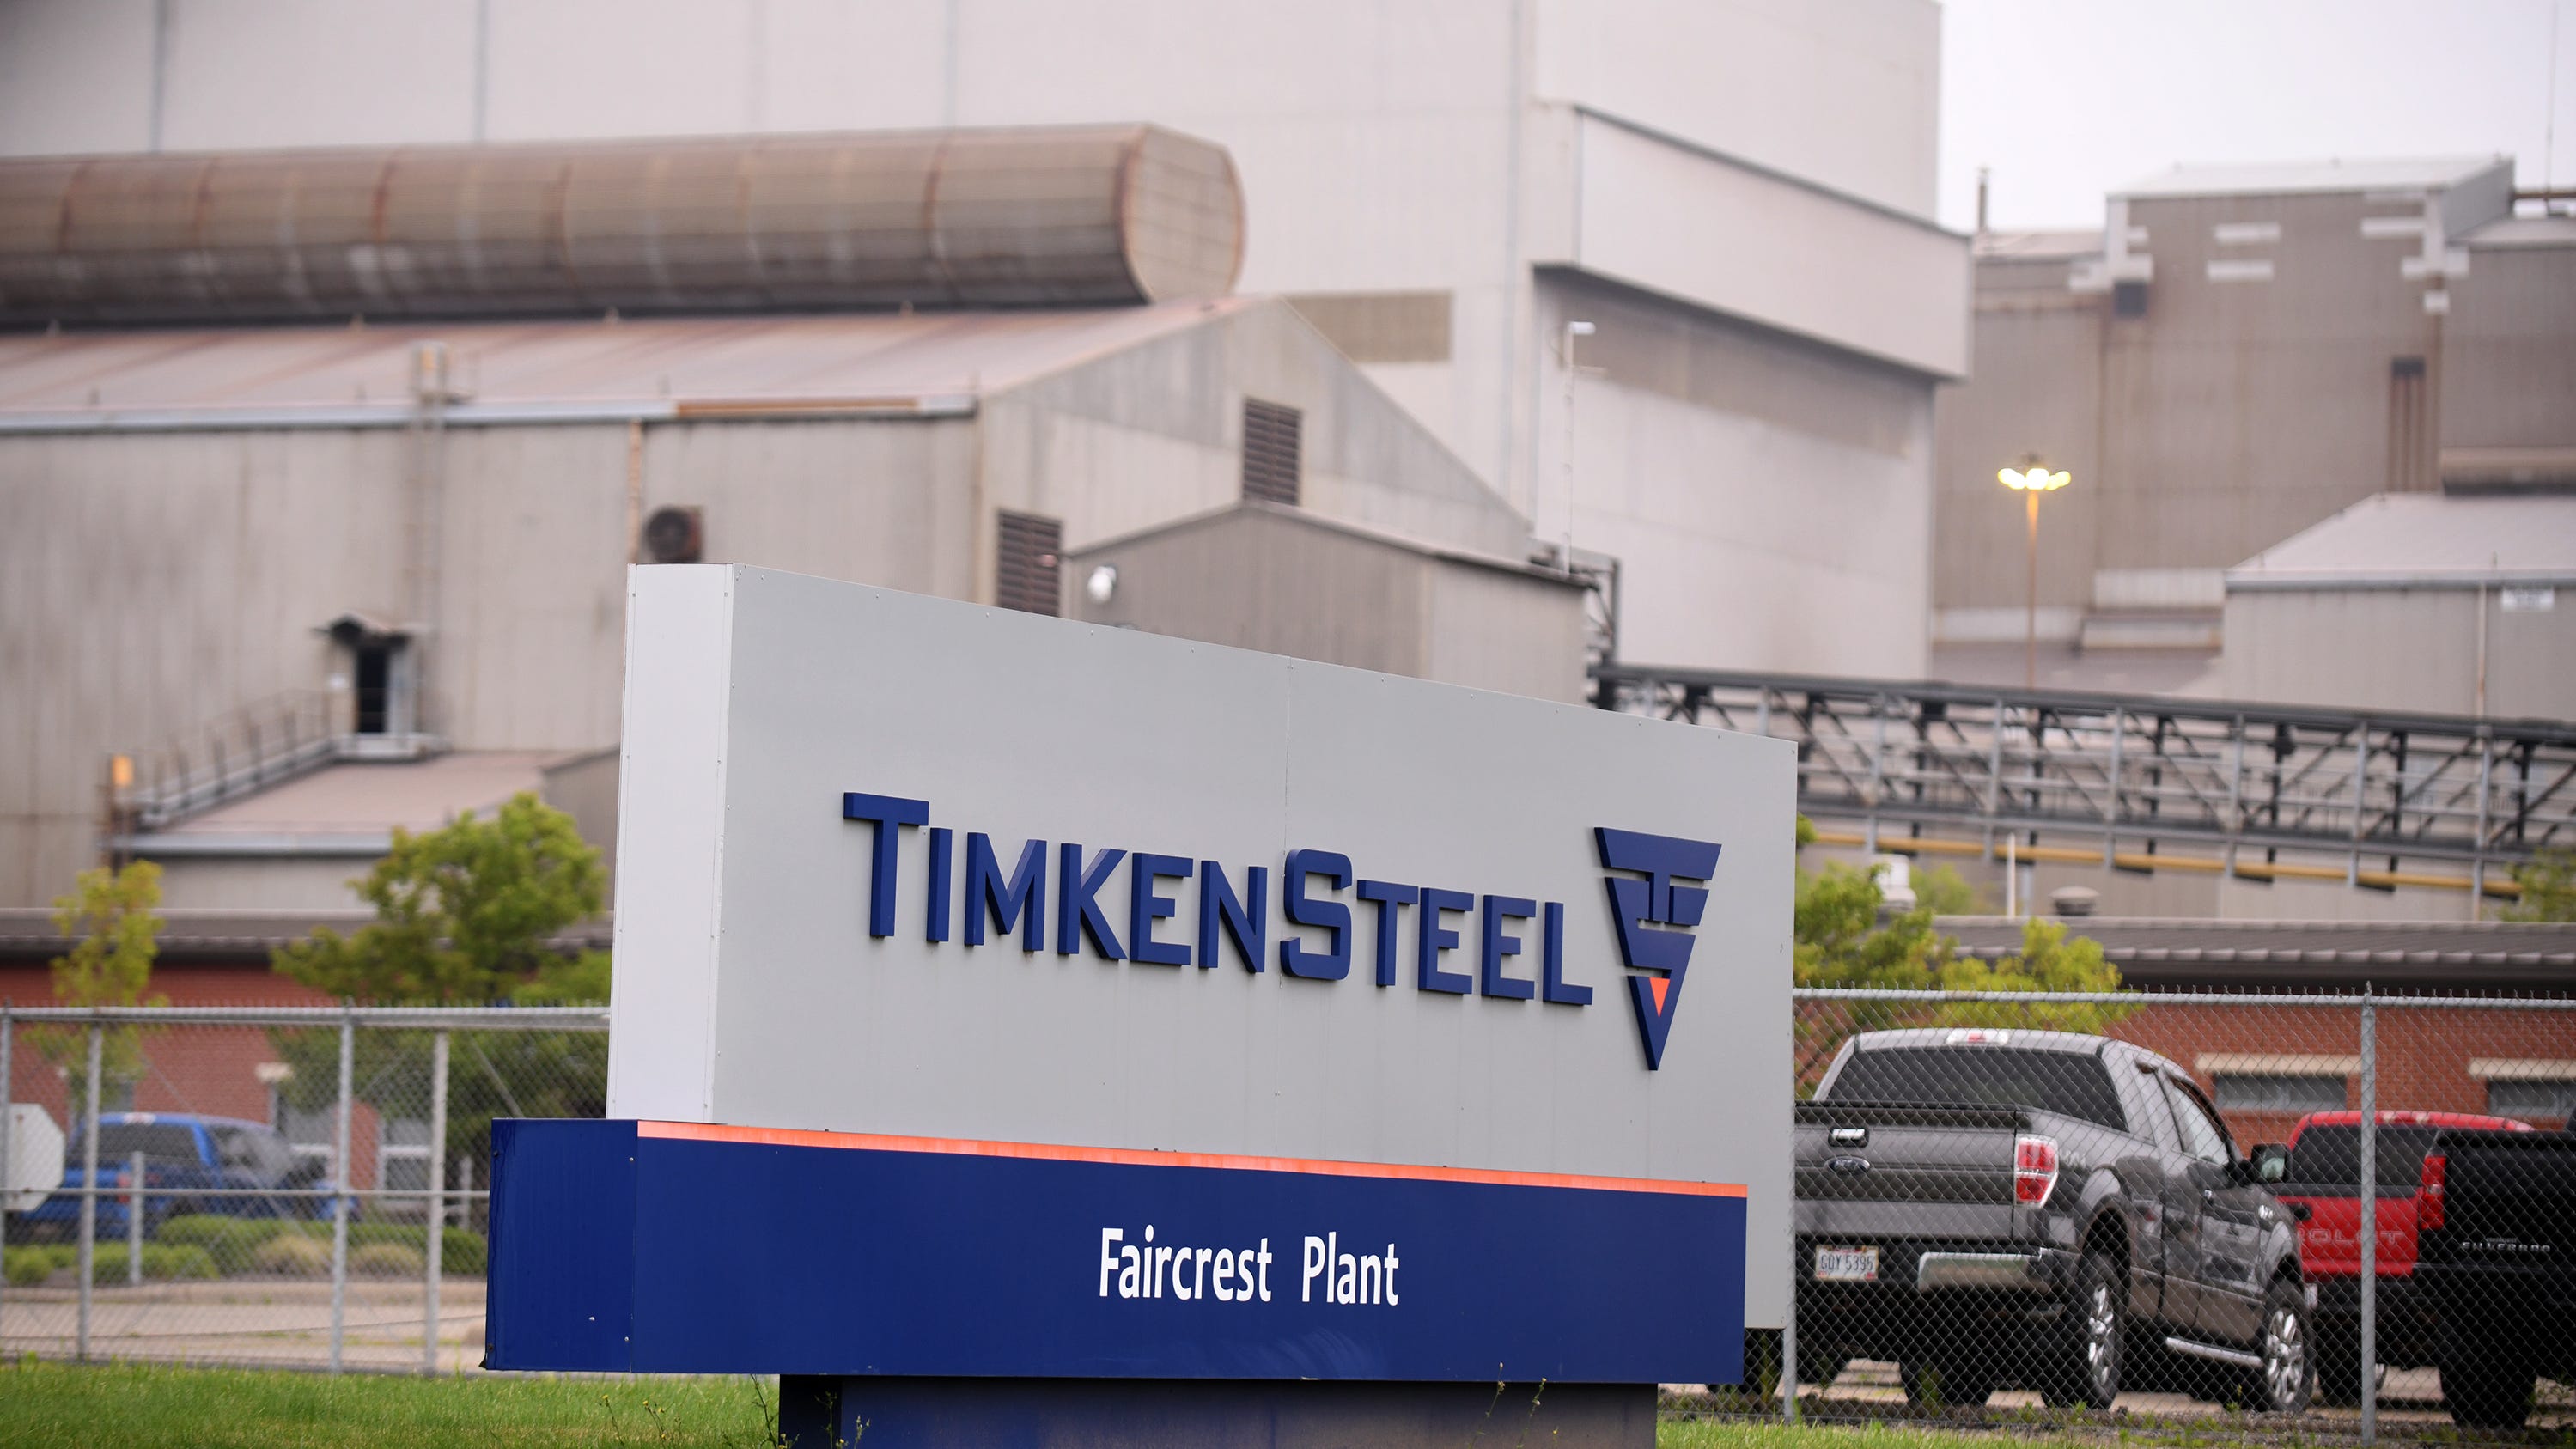 Fatal accident leads to lower revenue, earnings for TimkenSteel